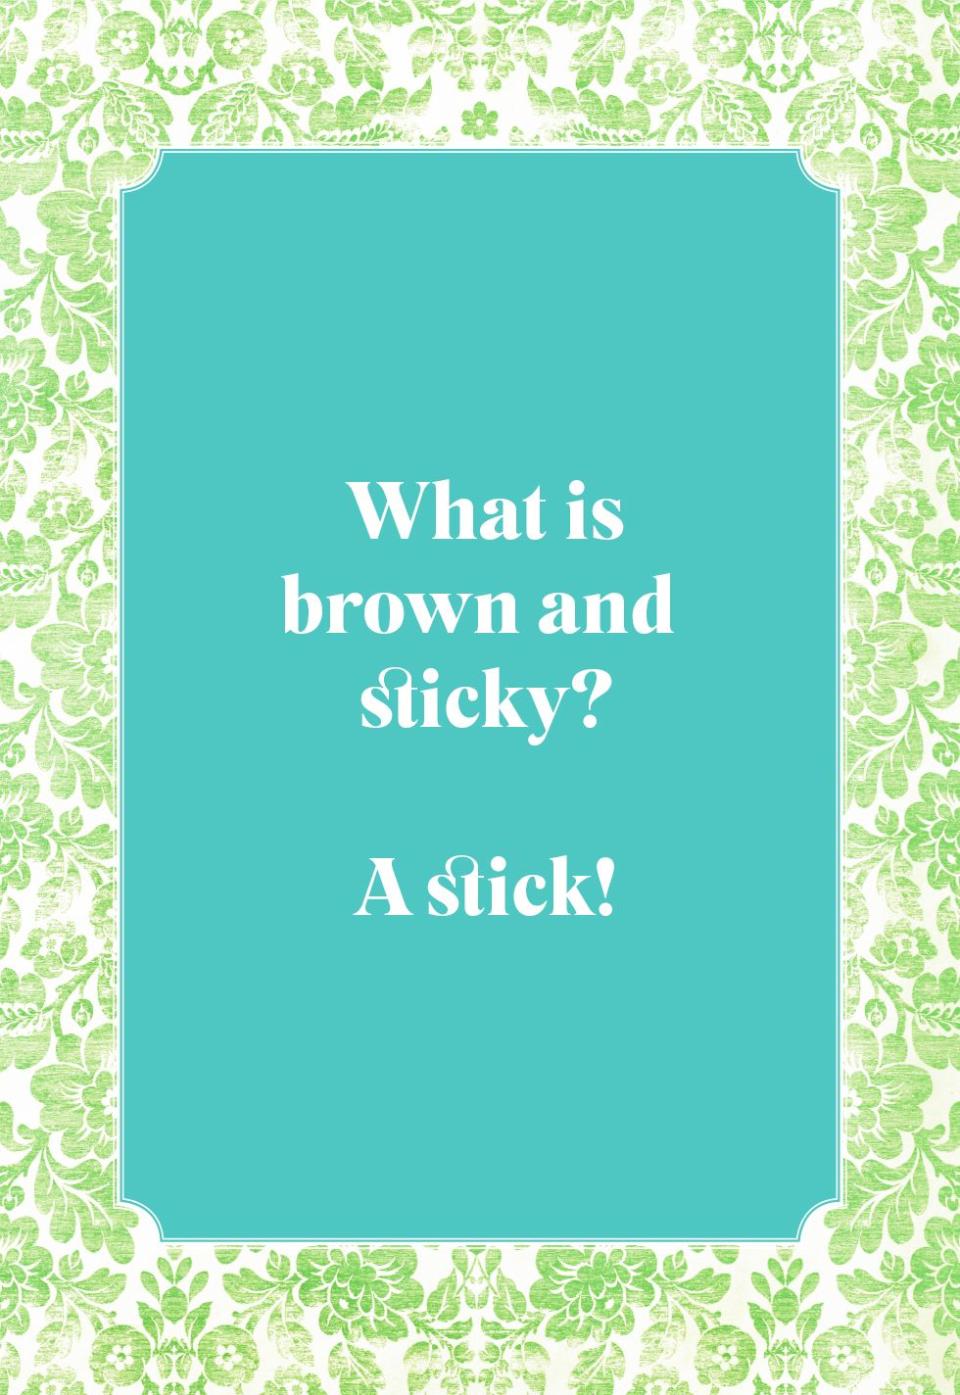 What is brown and sticky?